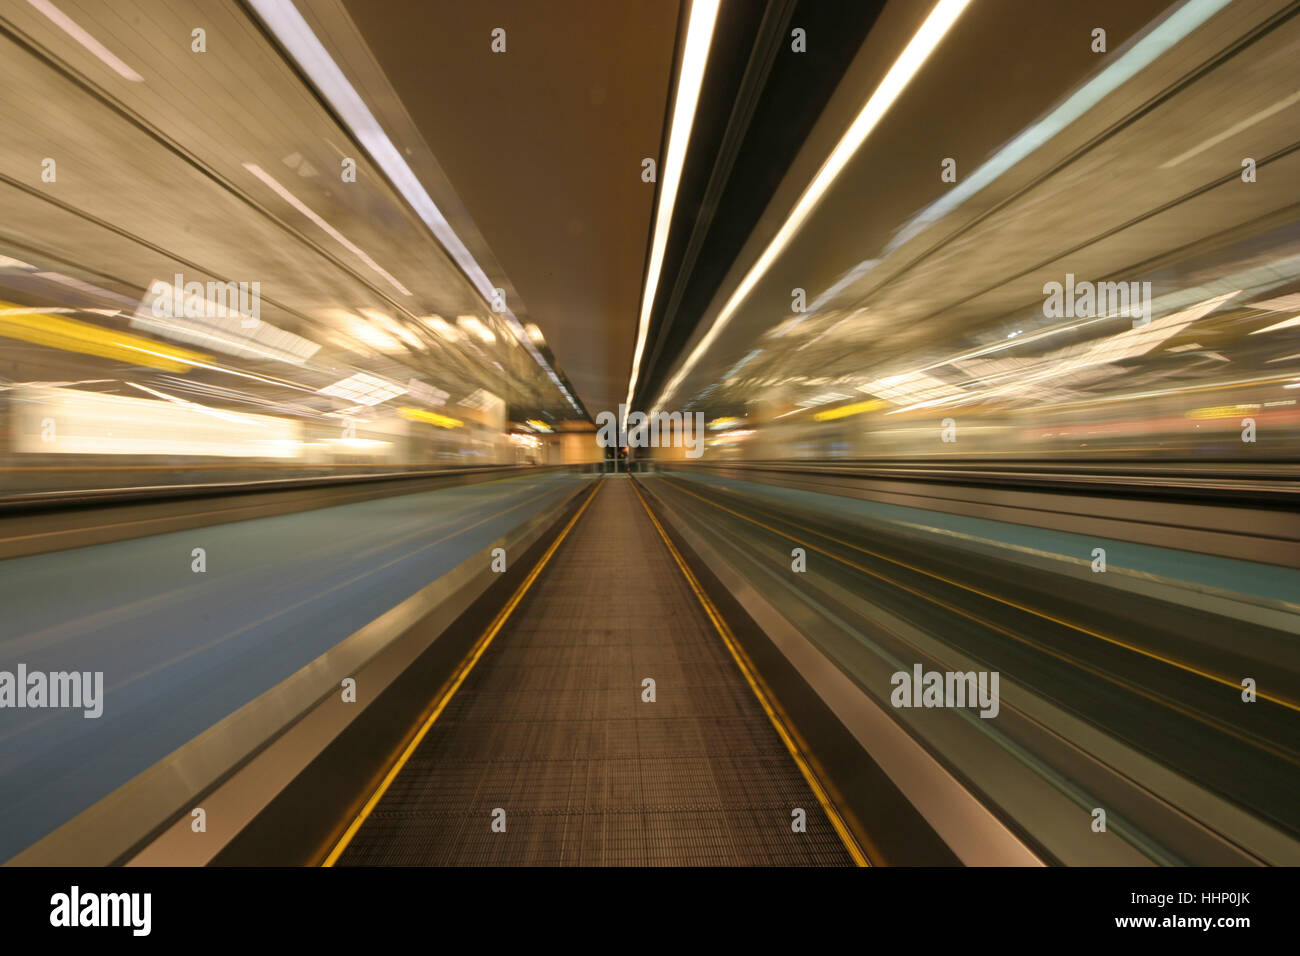 Blurred motion of moving walkway Stock Photo